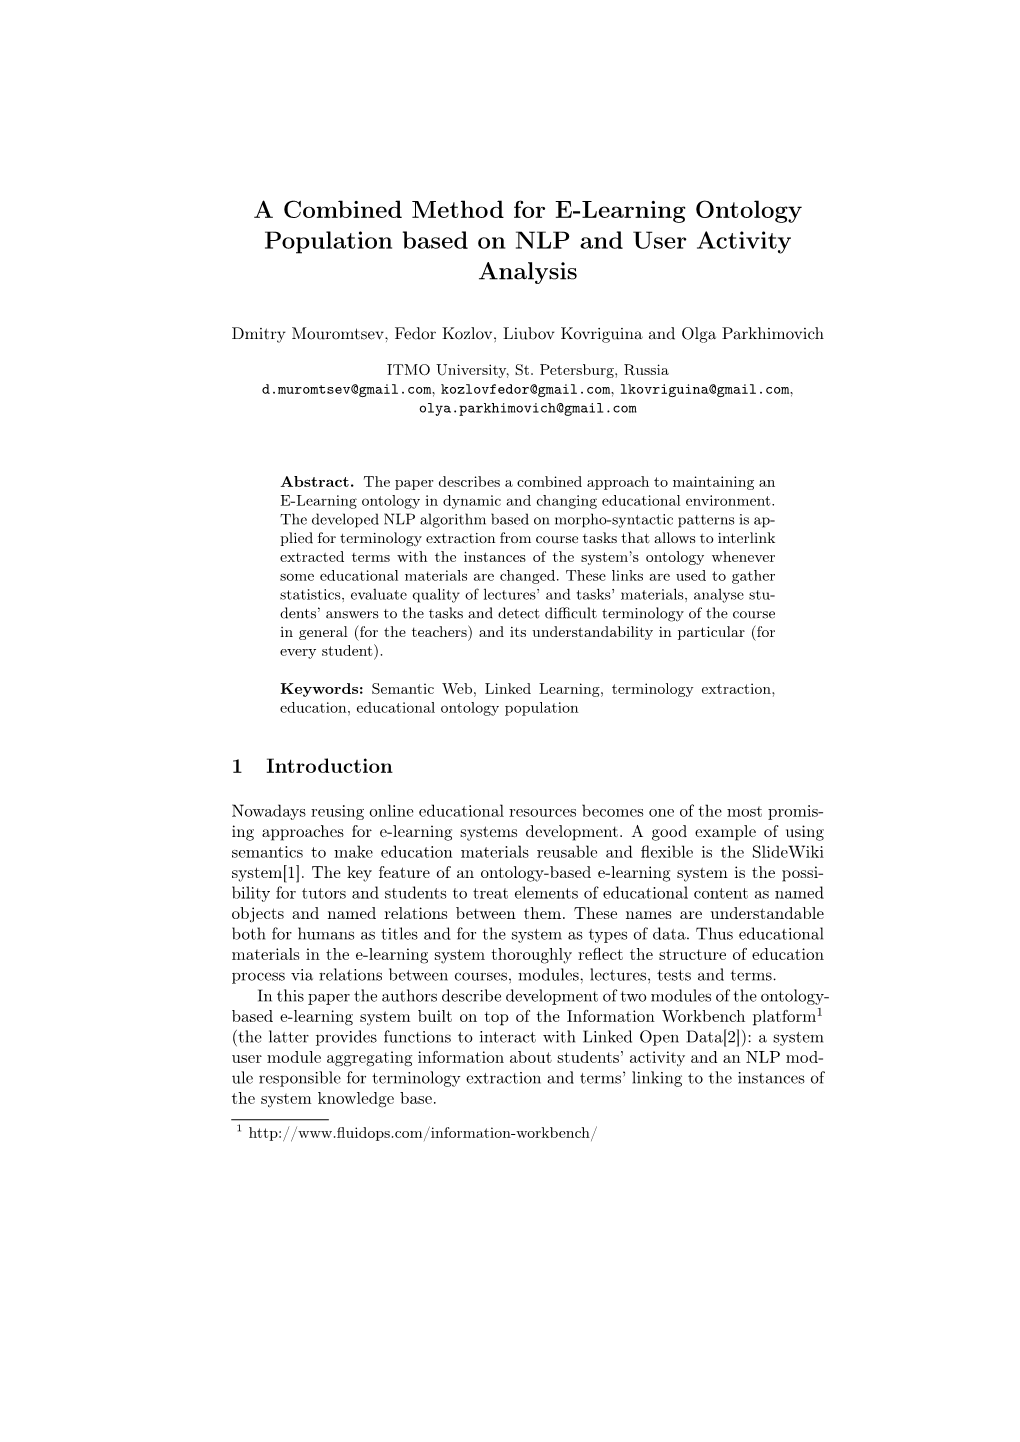 A Combined Method for E-Learning Ontology Population Based on NLP and User Activity Analysis